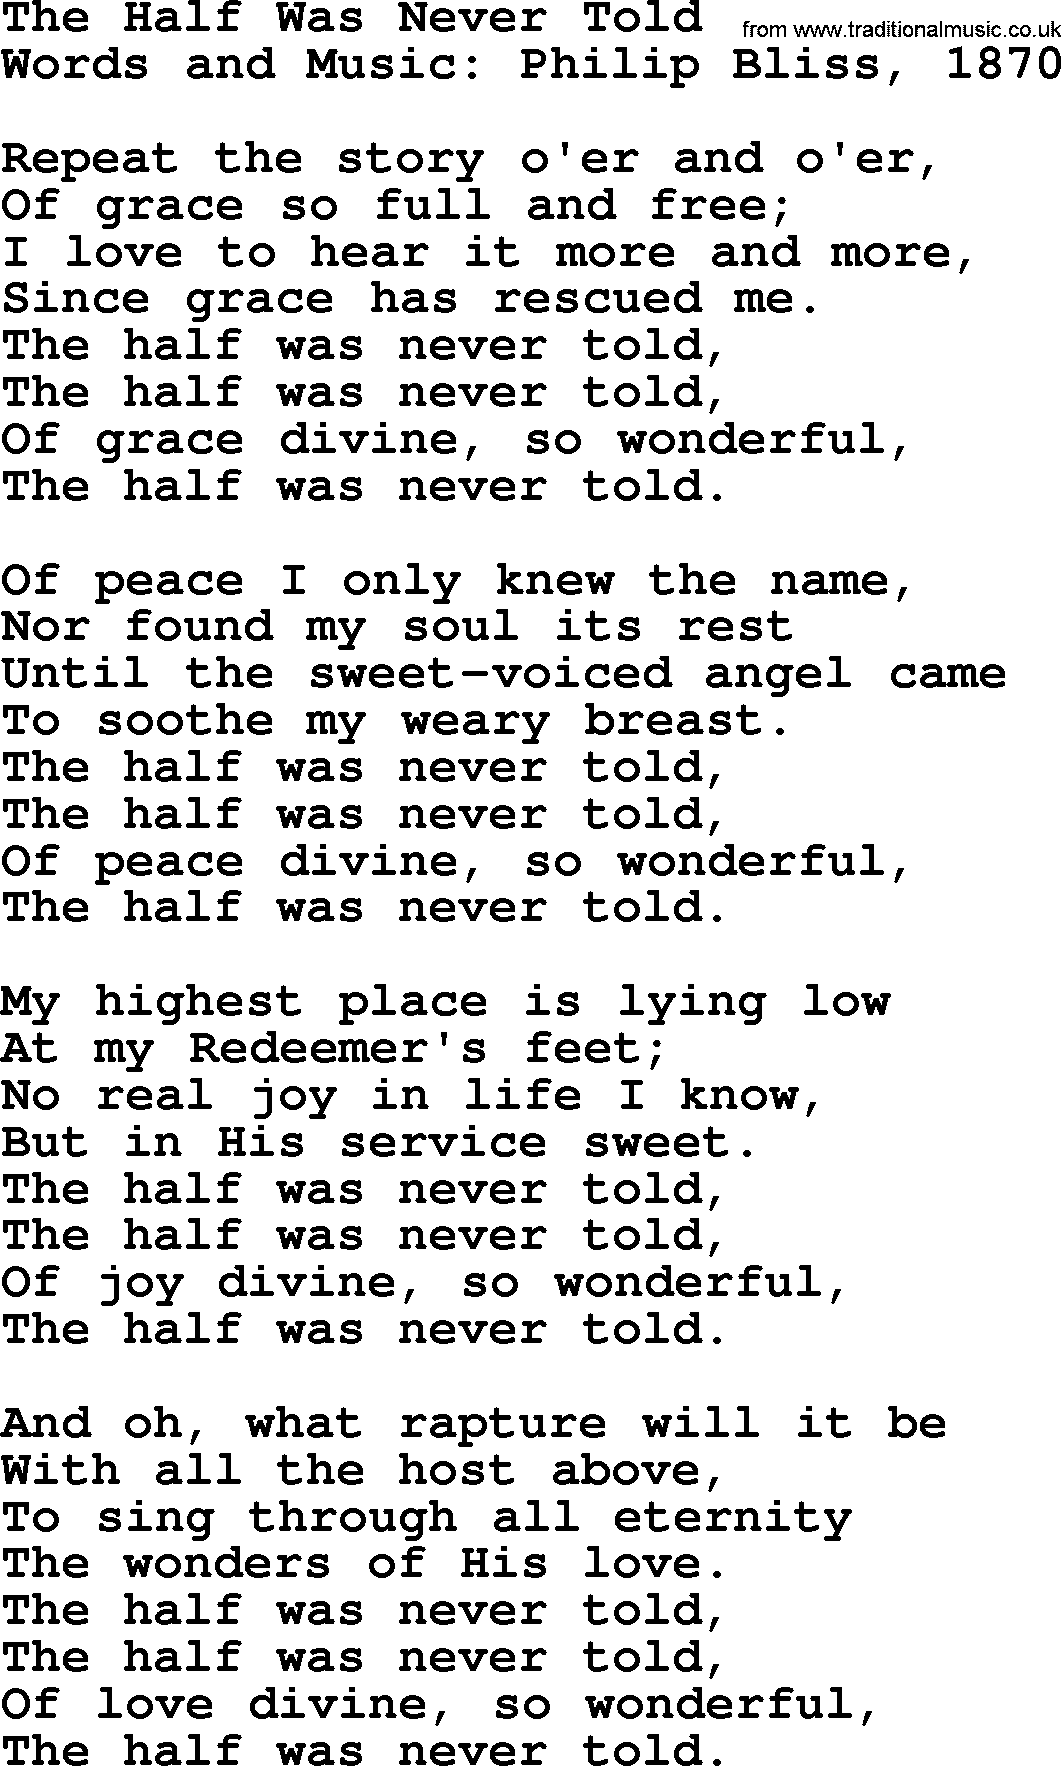 Philip Bliss Song: The Half Was Never Told, lyrics